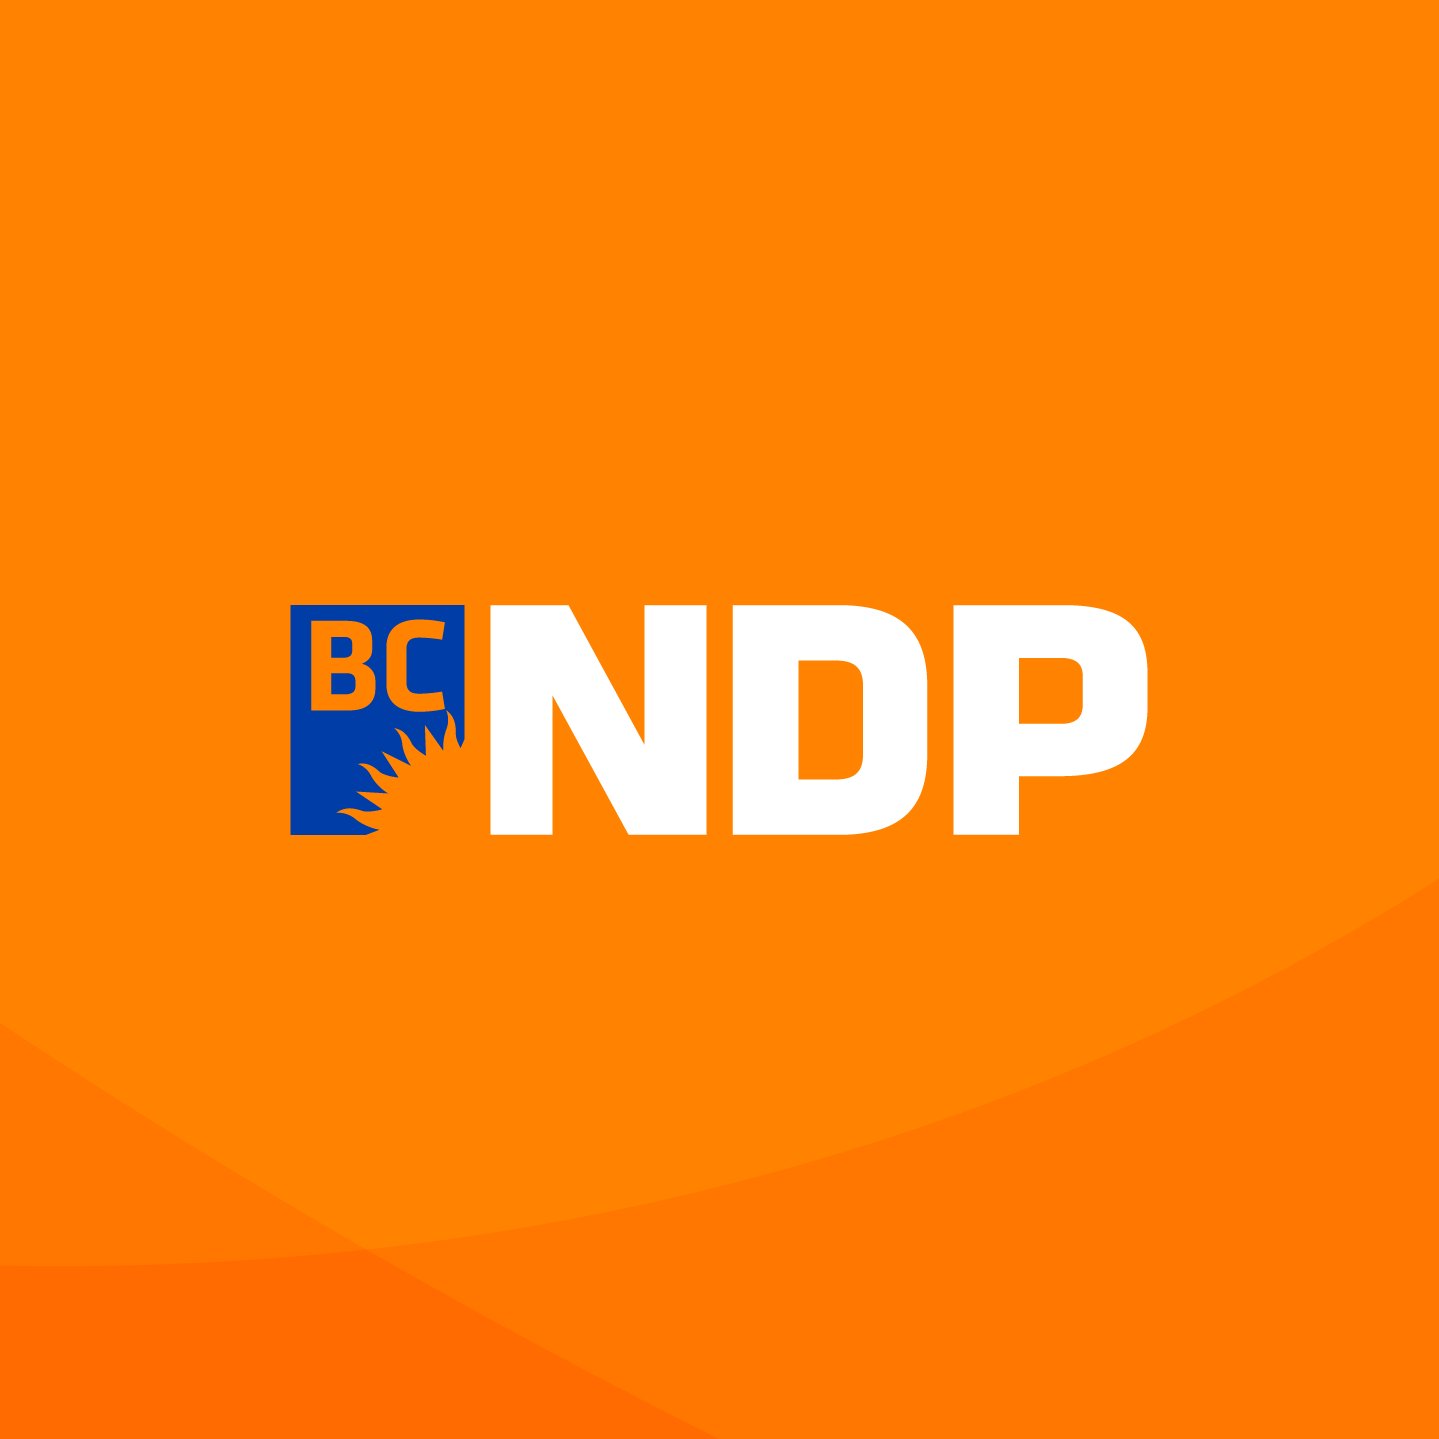 This is the official Twitter account of the Skeena #BCNDP. #BetterBC